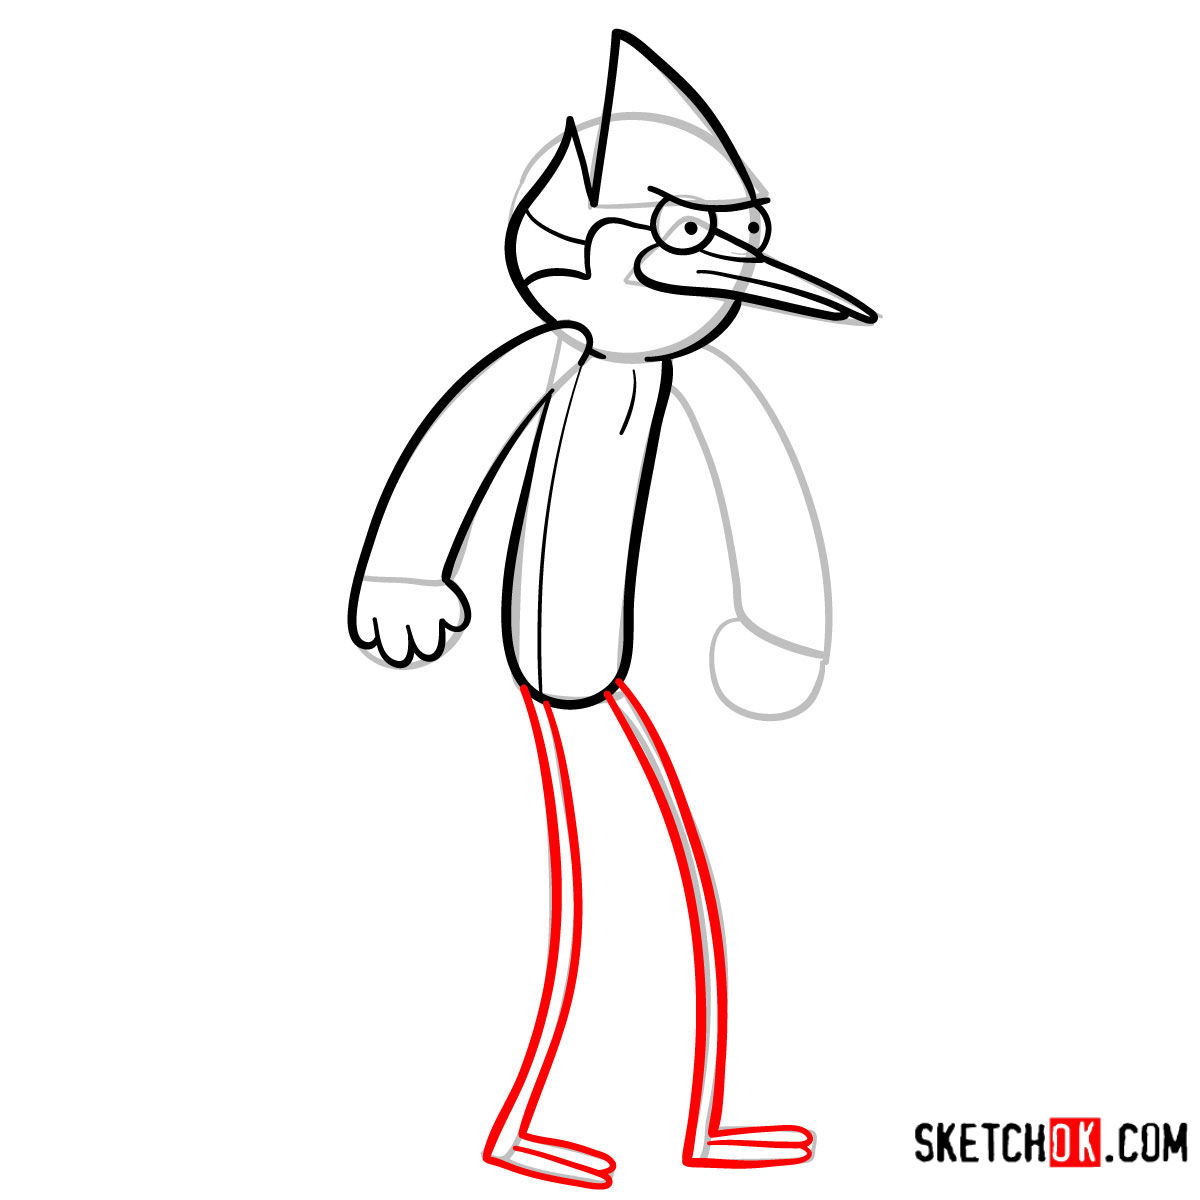 How to draw angry Mordecai step by step - step 07